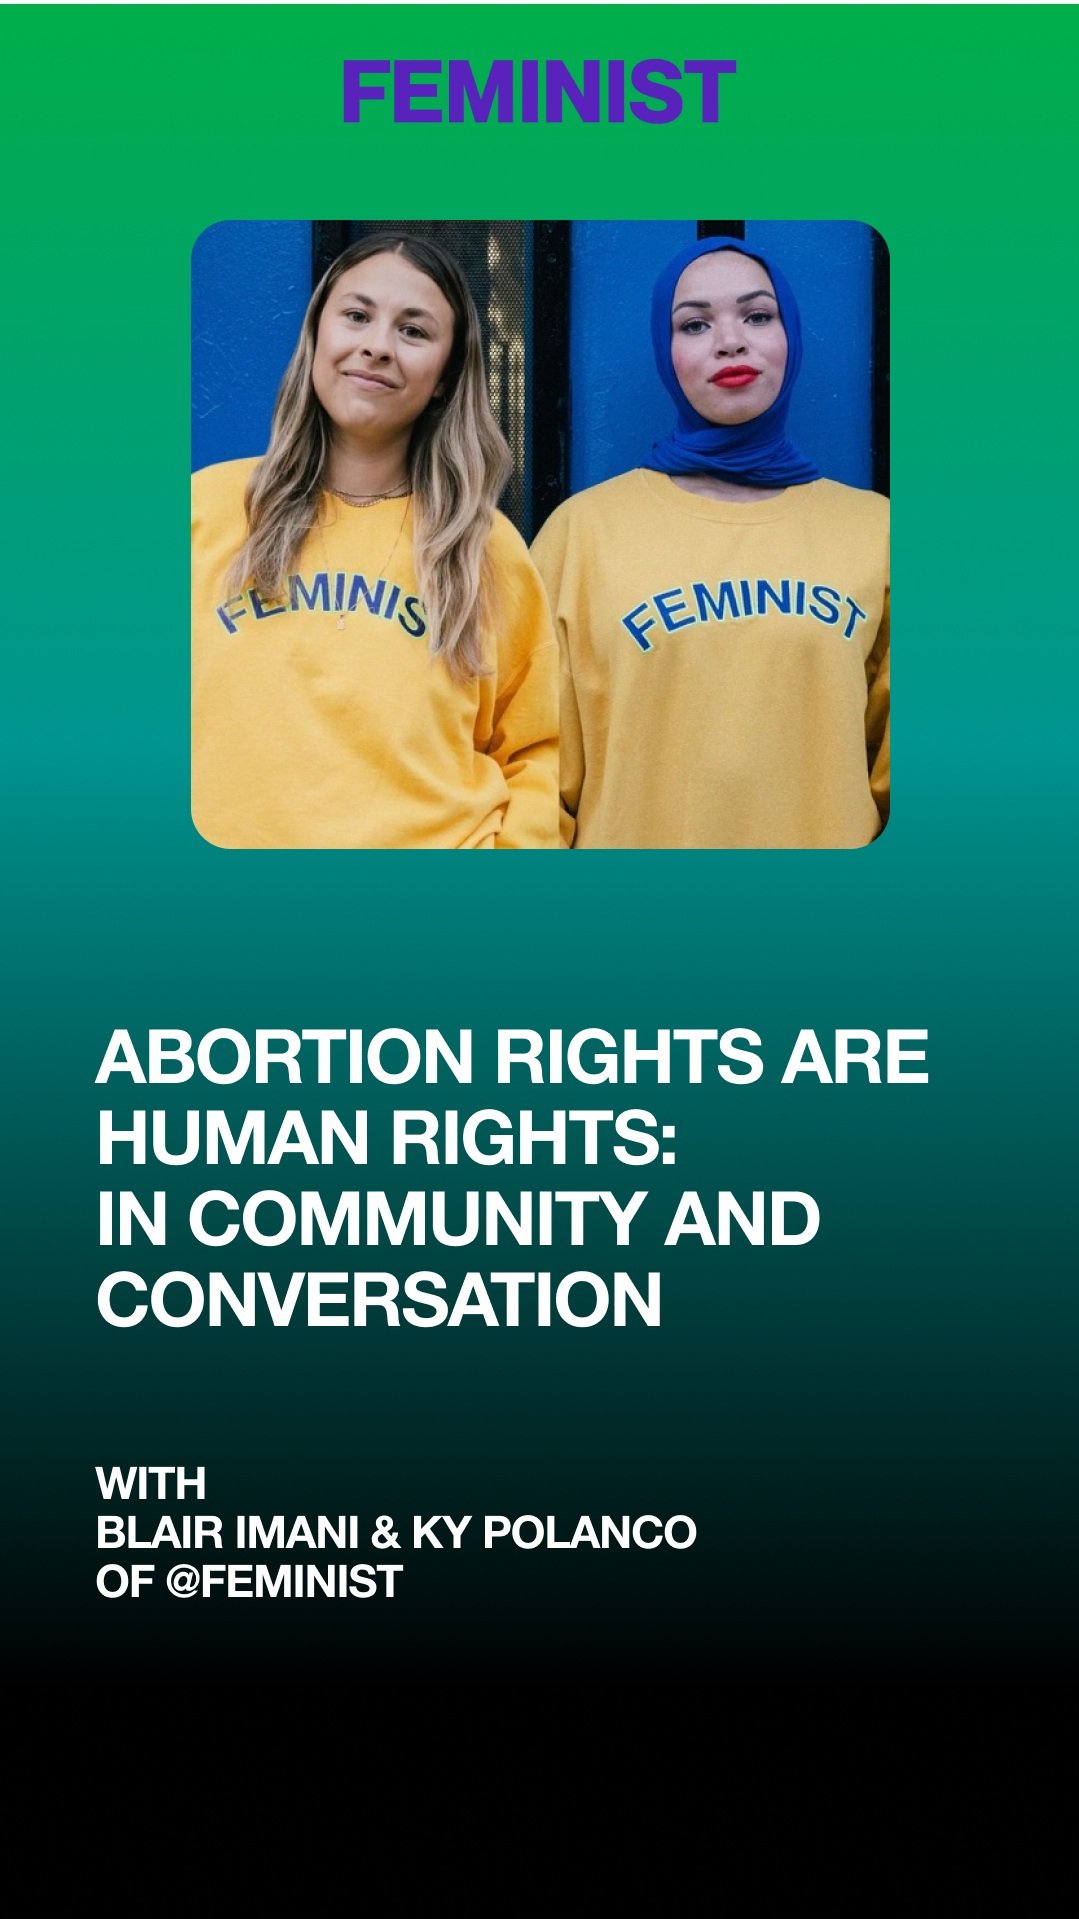 Team FEMINIST in community and healing for the state of abortion